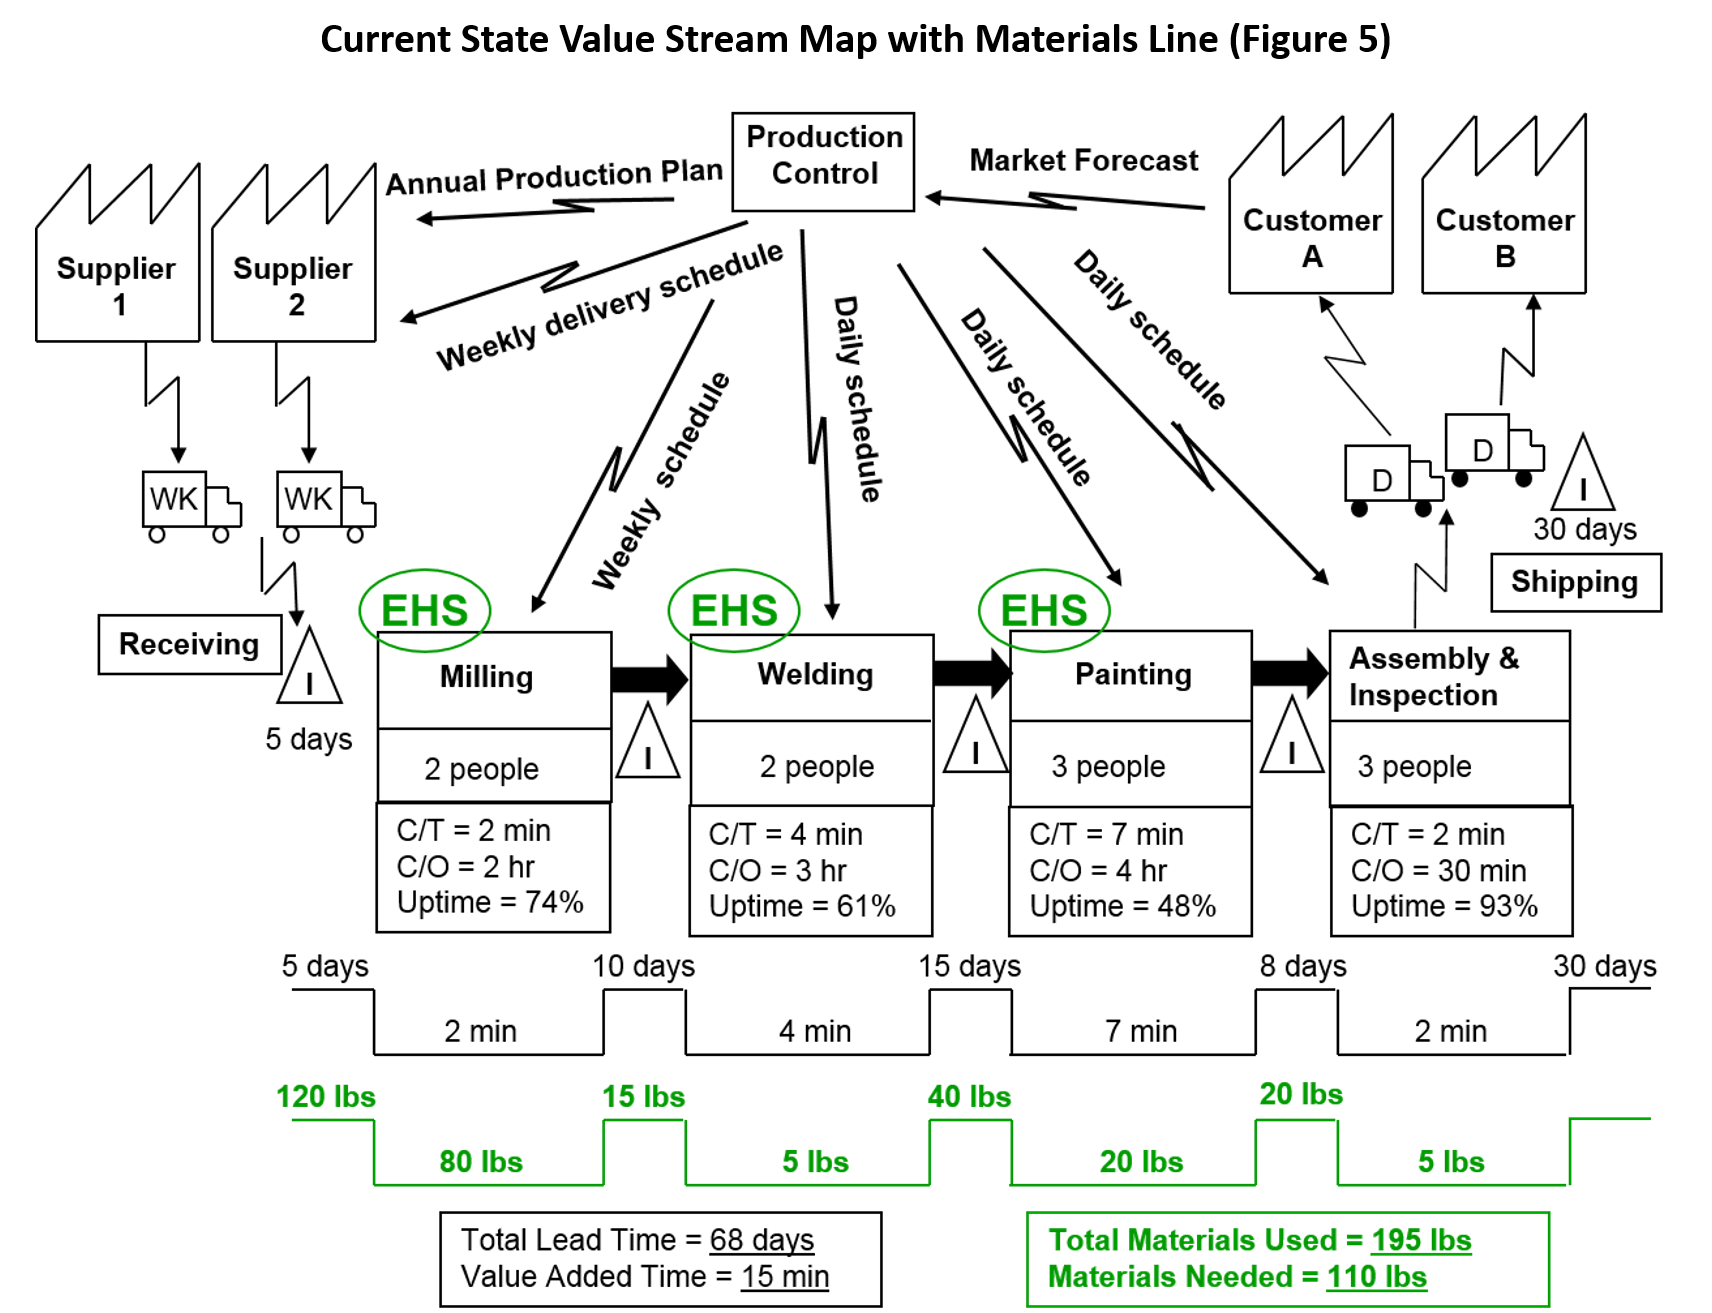 Current State VSM with Materials Line (Figure 5)